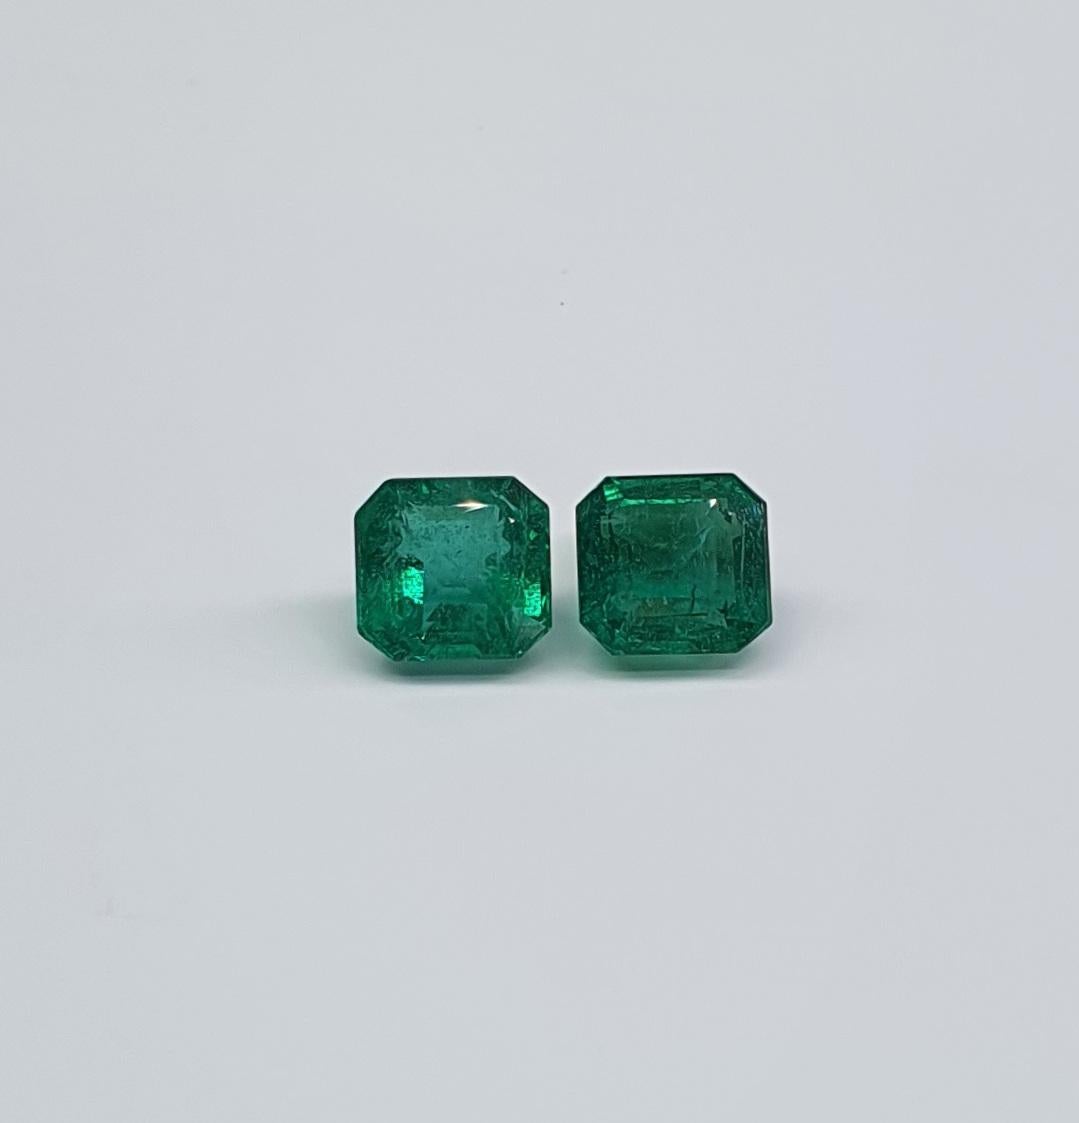 Beautiful 6.09 ct Emerald Pair , origin Zambia.
Emerald square cut.
Could be a great decision for the pair  of stud earrings or pendan/ring.
Exellent colour mach. Good cut.
Stones have natural inclusions, which is common for emeralds.
Medium natural